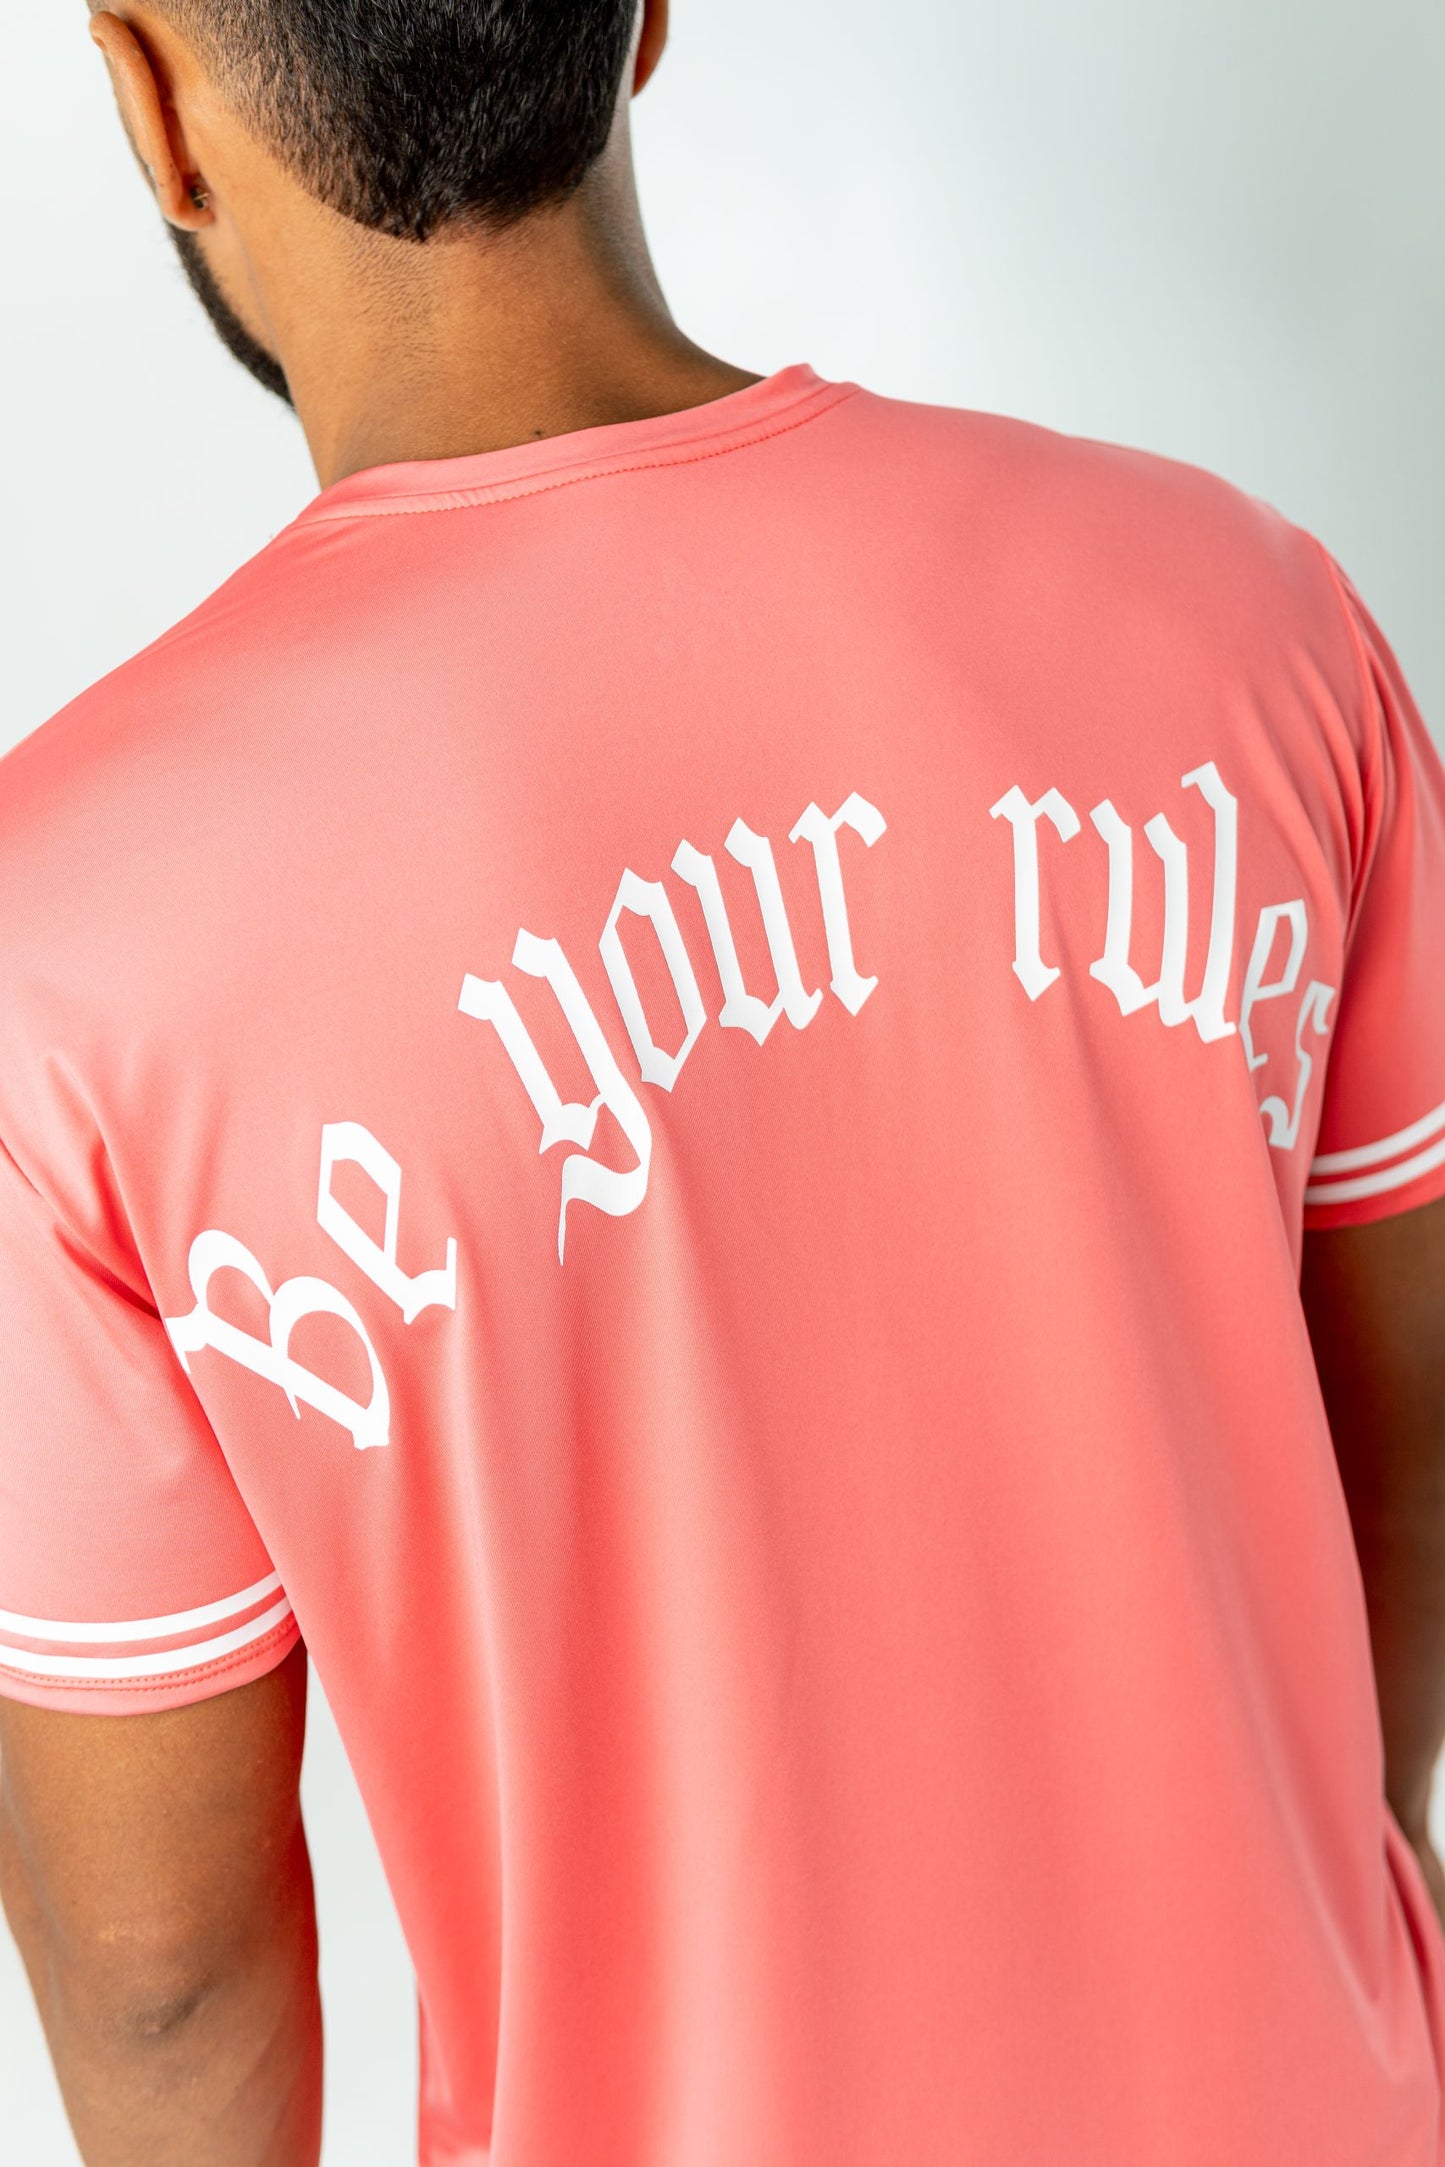 CAMISETA DRY-FIT 'BE YOUR RULES' MELOCOTÓN